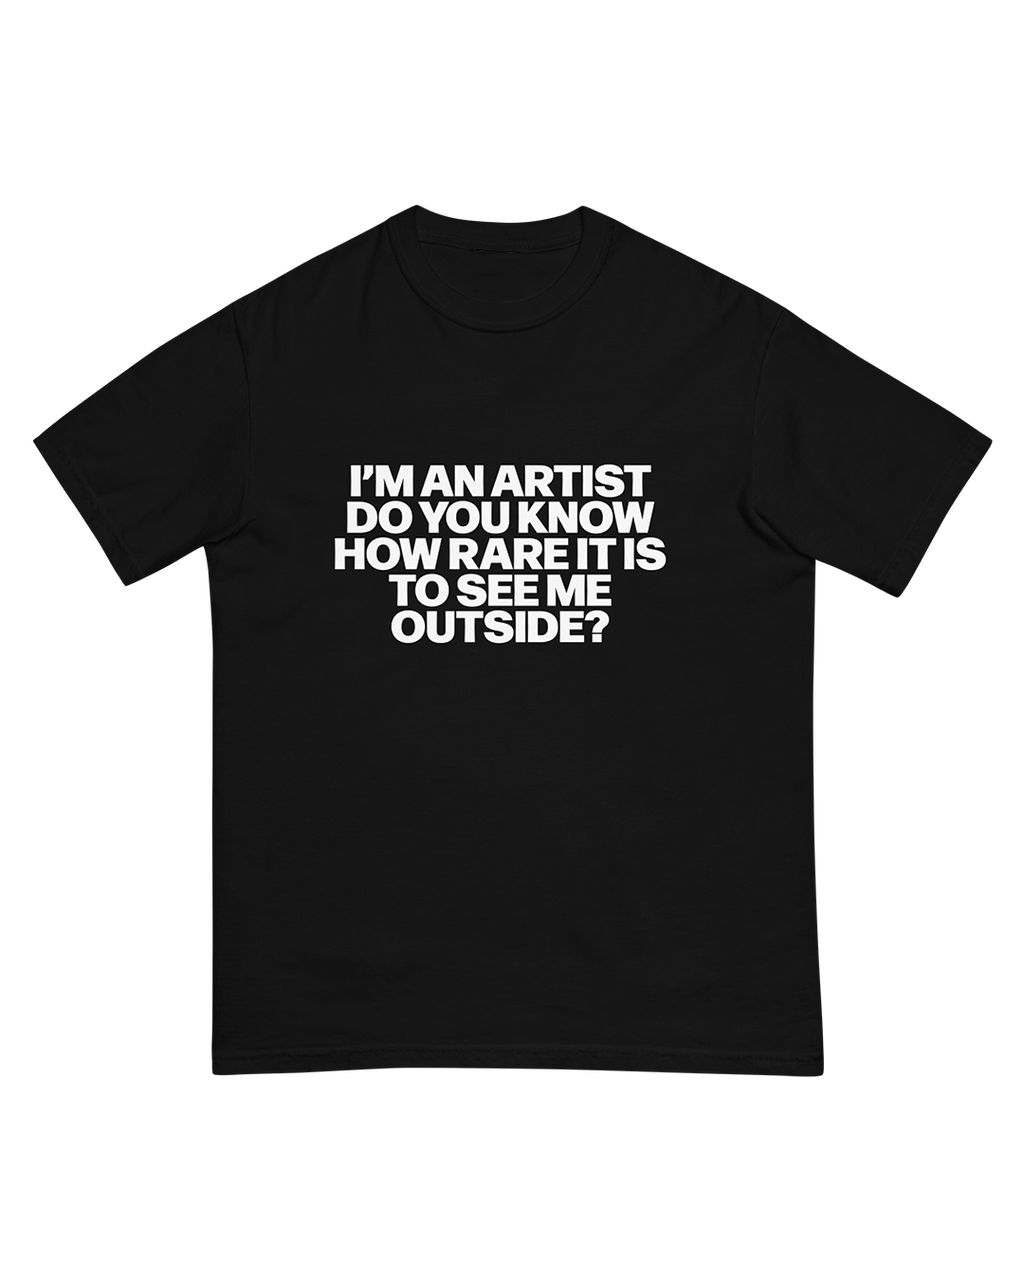 I’M AN ARTIST DO YOU KNOW HOW RARE IT IS TO SEE ME OUTSIDE? (BLACK T-SHIRT)